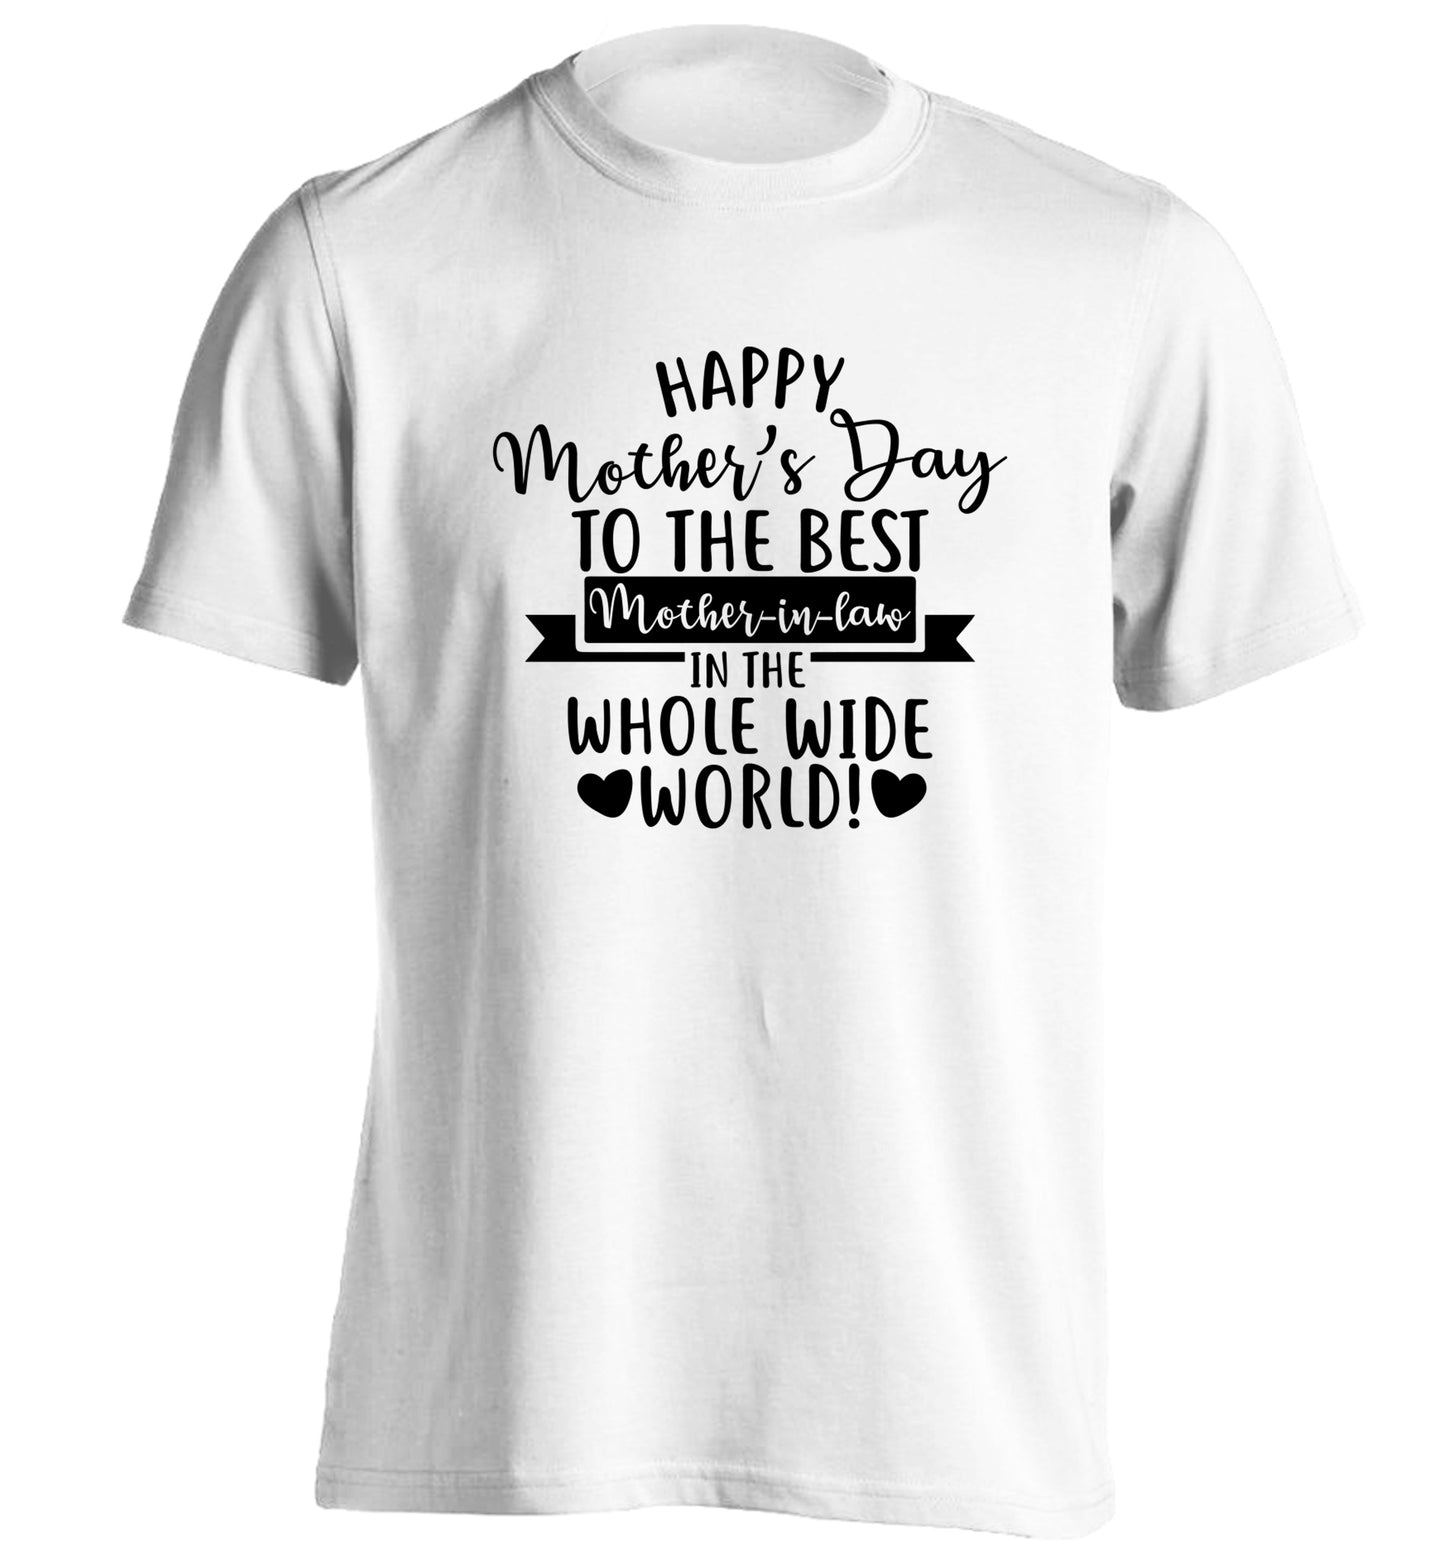 Happy mother's day to the best mother-in-law in the world adults unisex white Tshirt 2XL